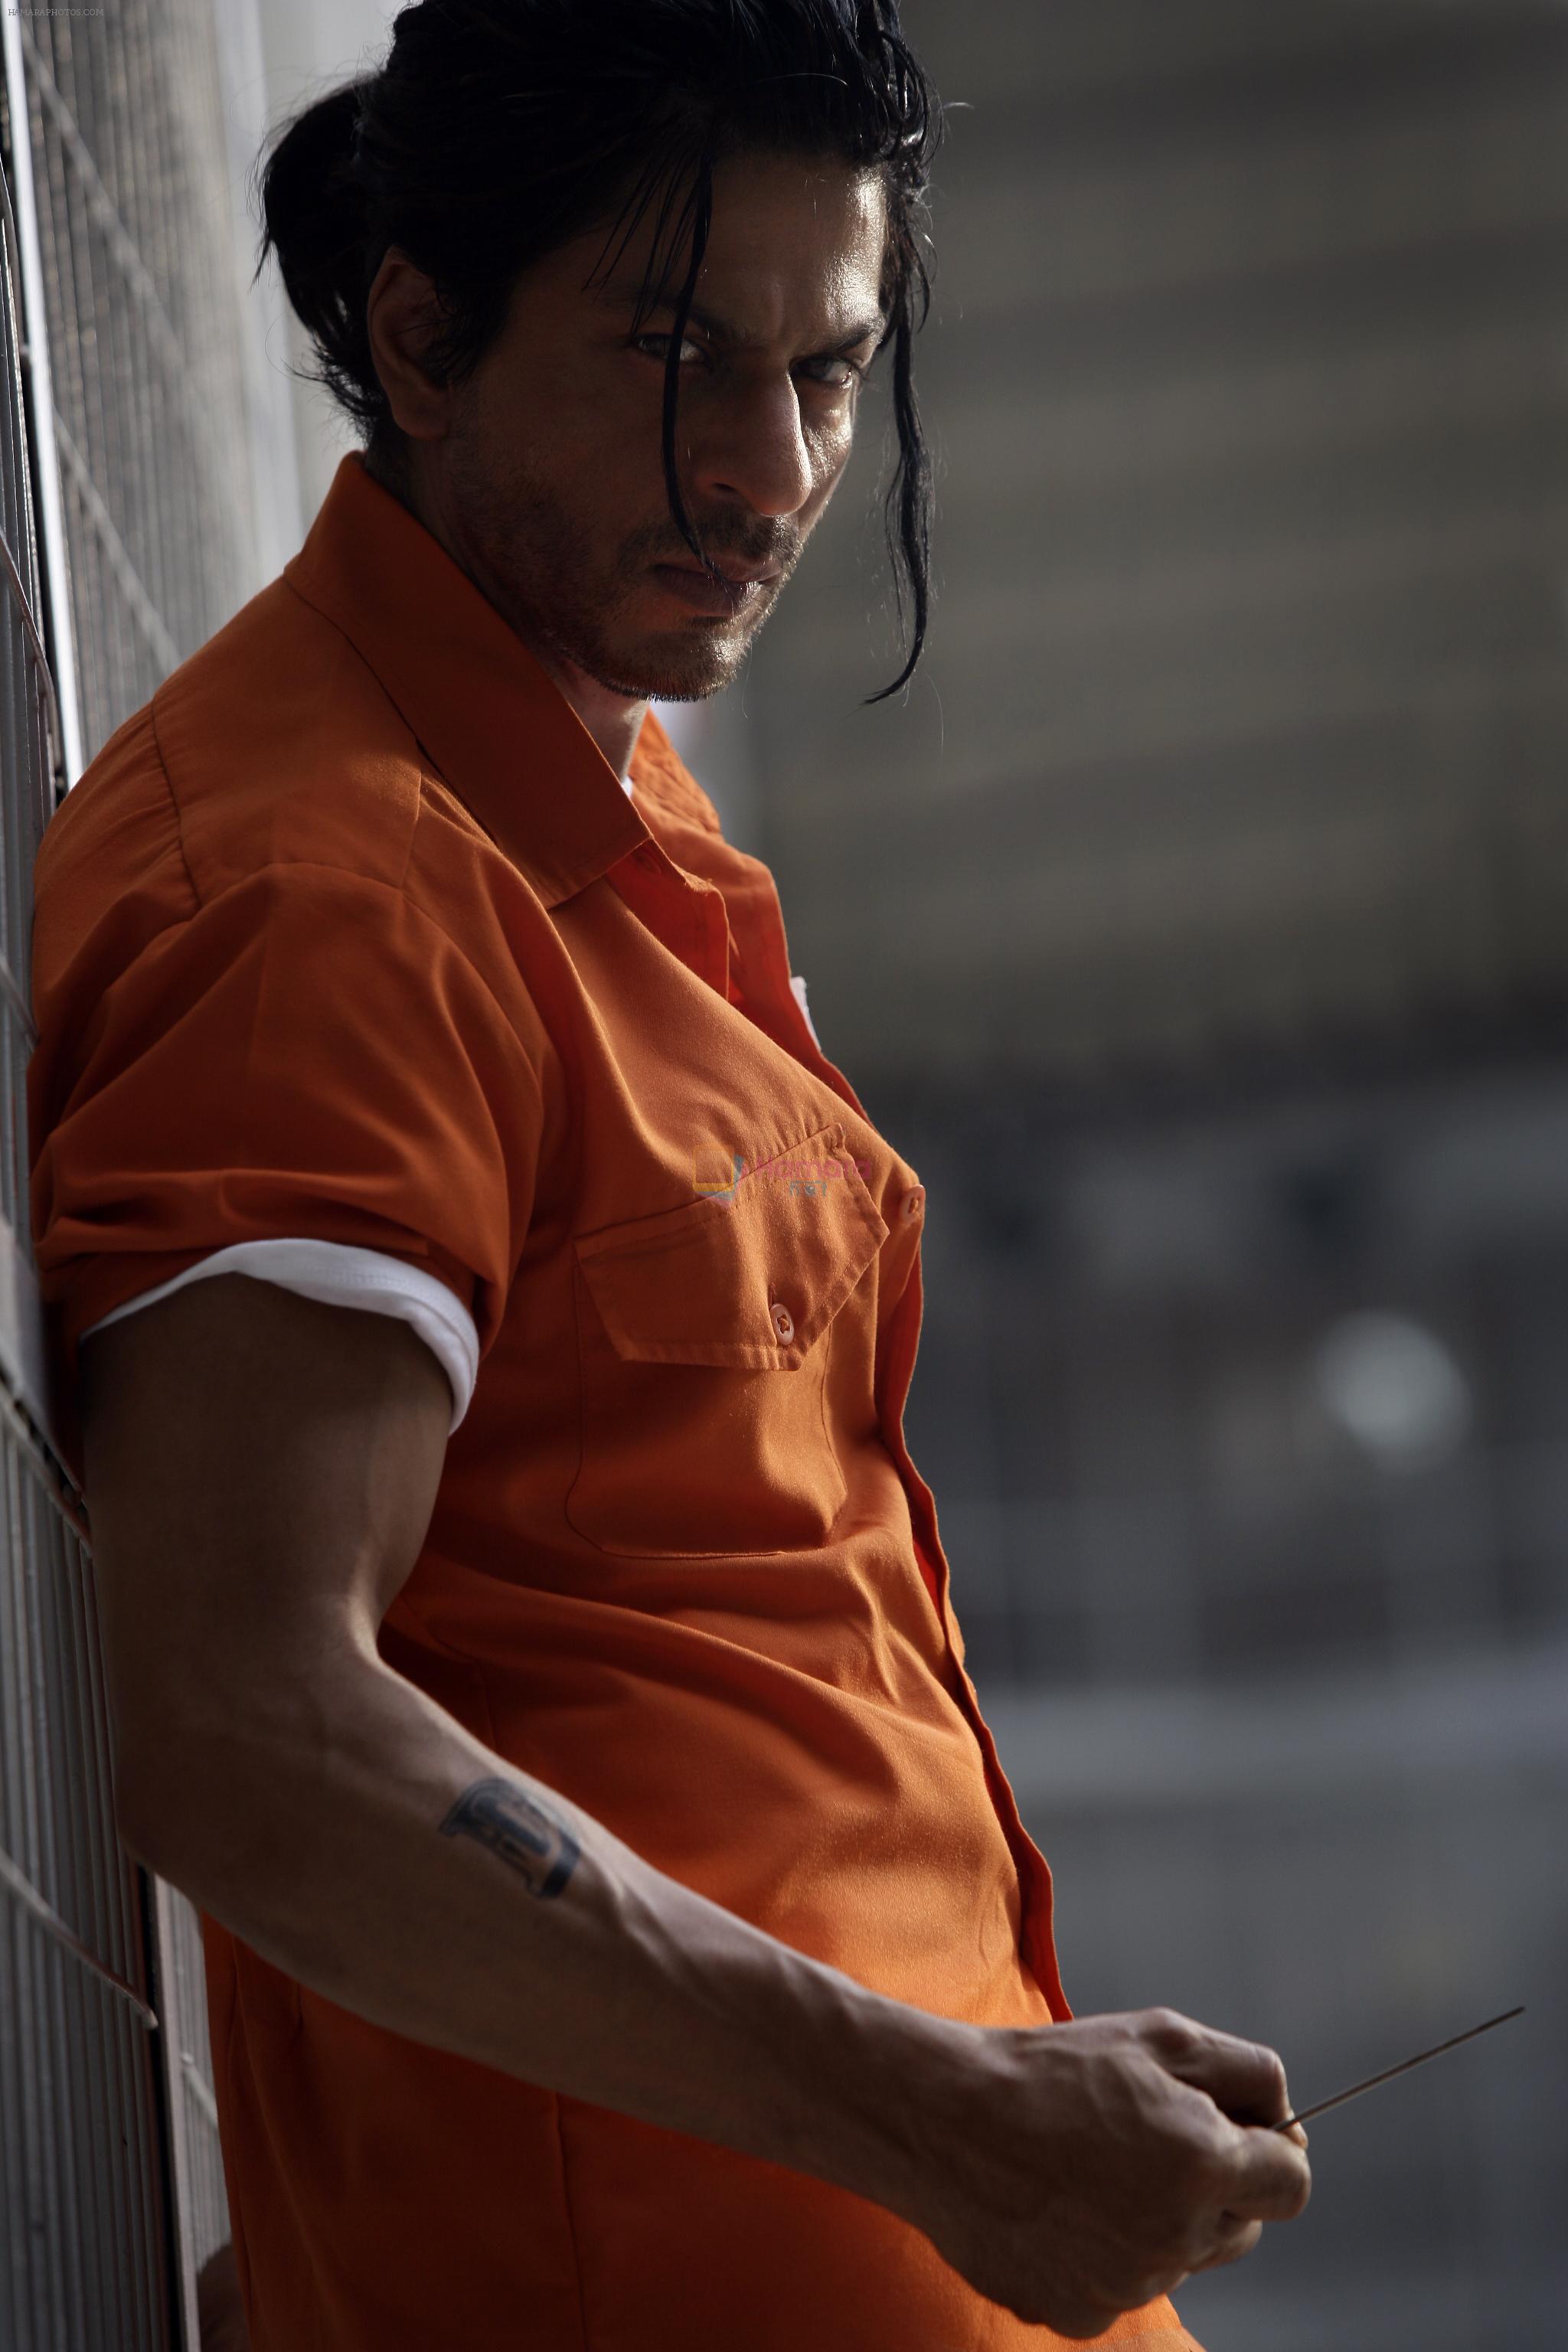 Shahrukh Khan in the still from movie Don 2